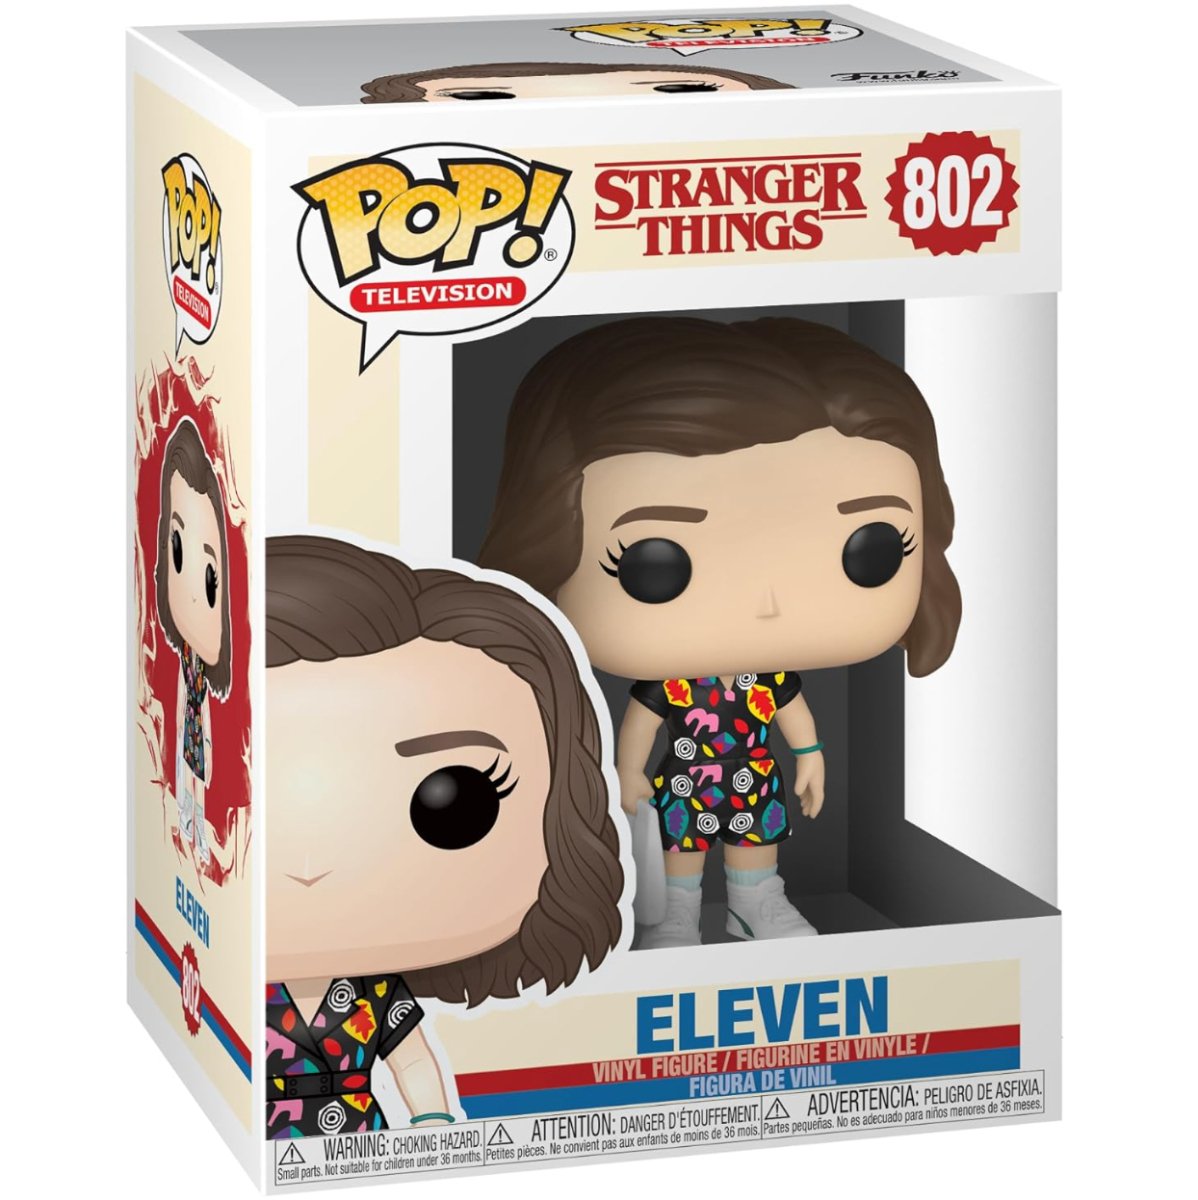 Stranger Things - Eleven [Mall Outfit] #802 - Funko Pop! Vinyl Television - Persona Toys